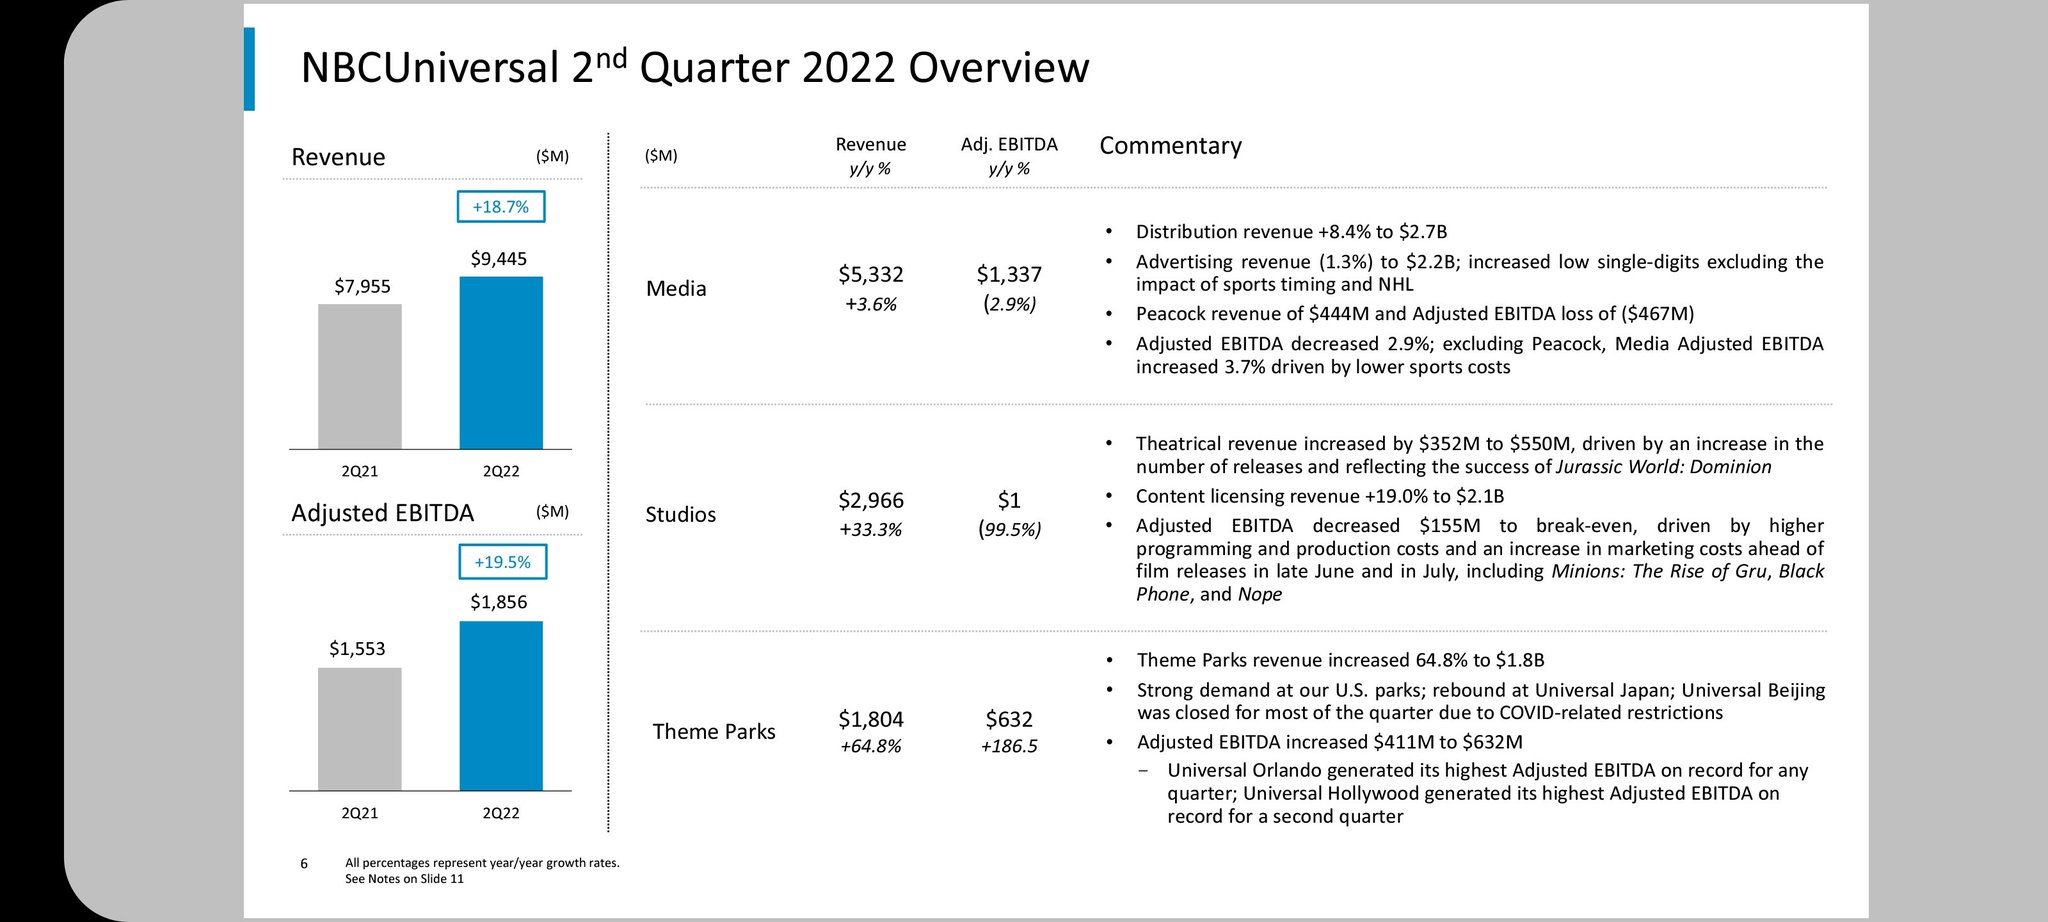 Tommy Hawkins on Twitter "CMCSA Comcast Q2 Earnings call coming up